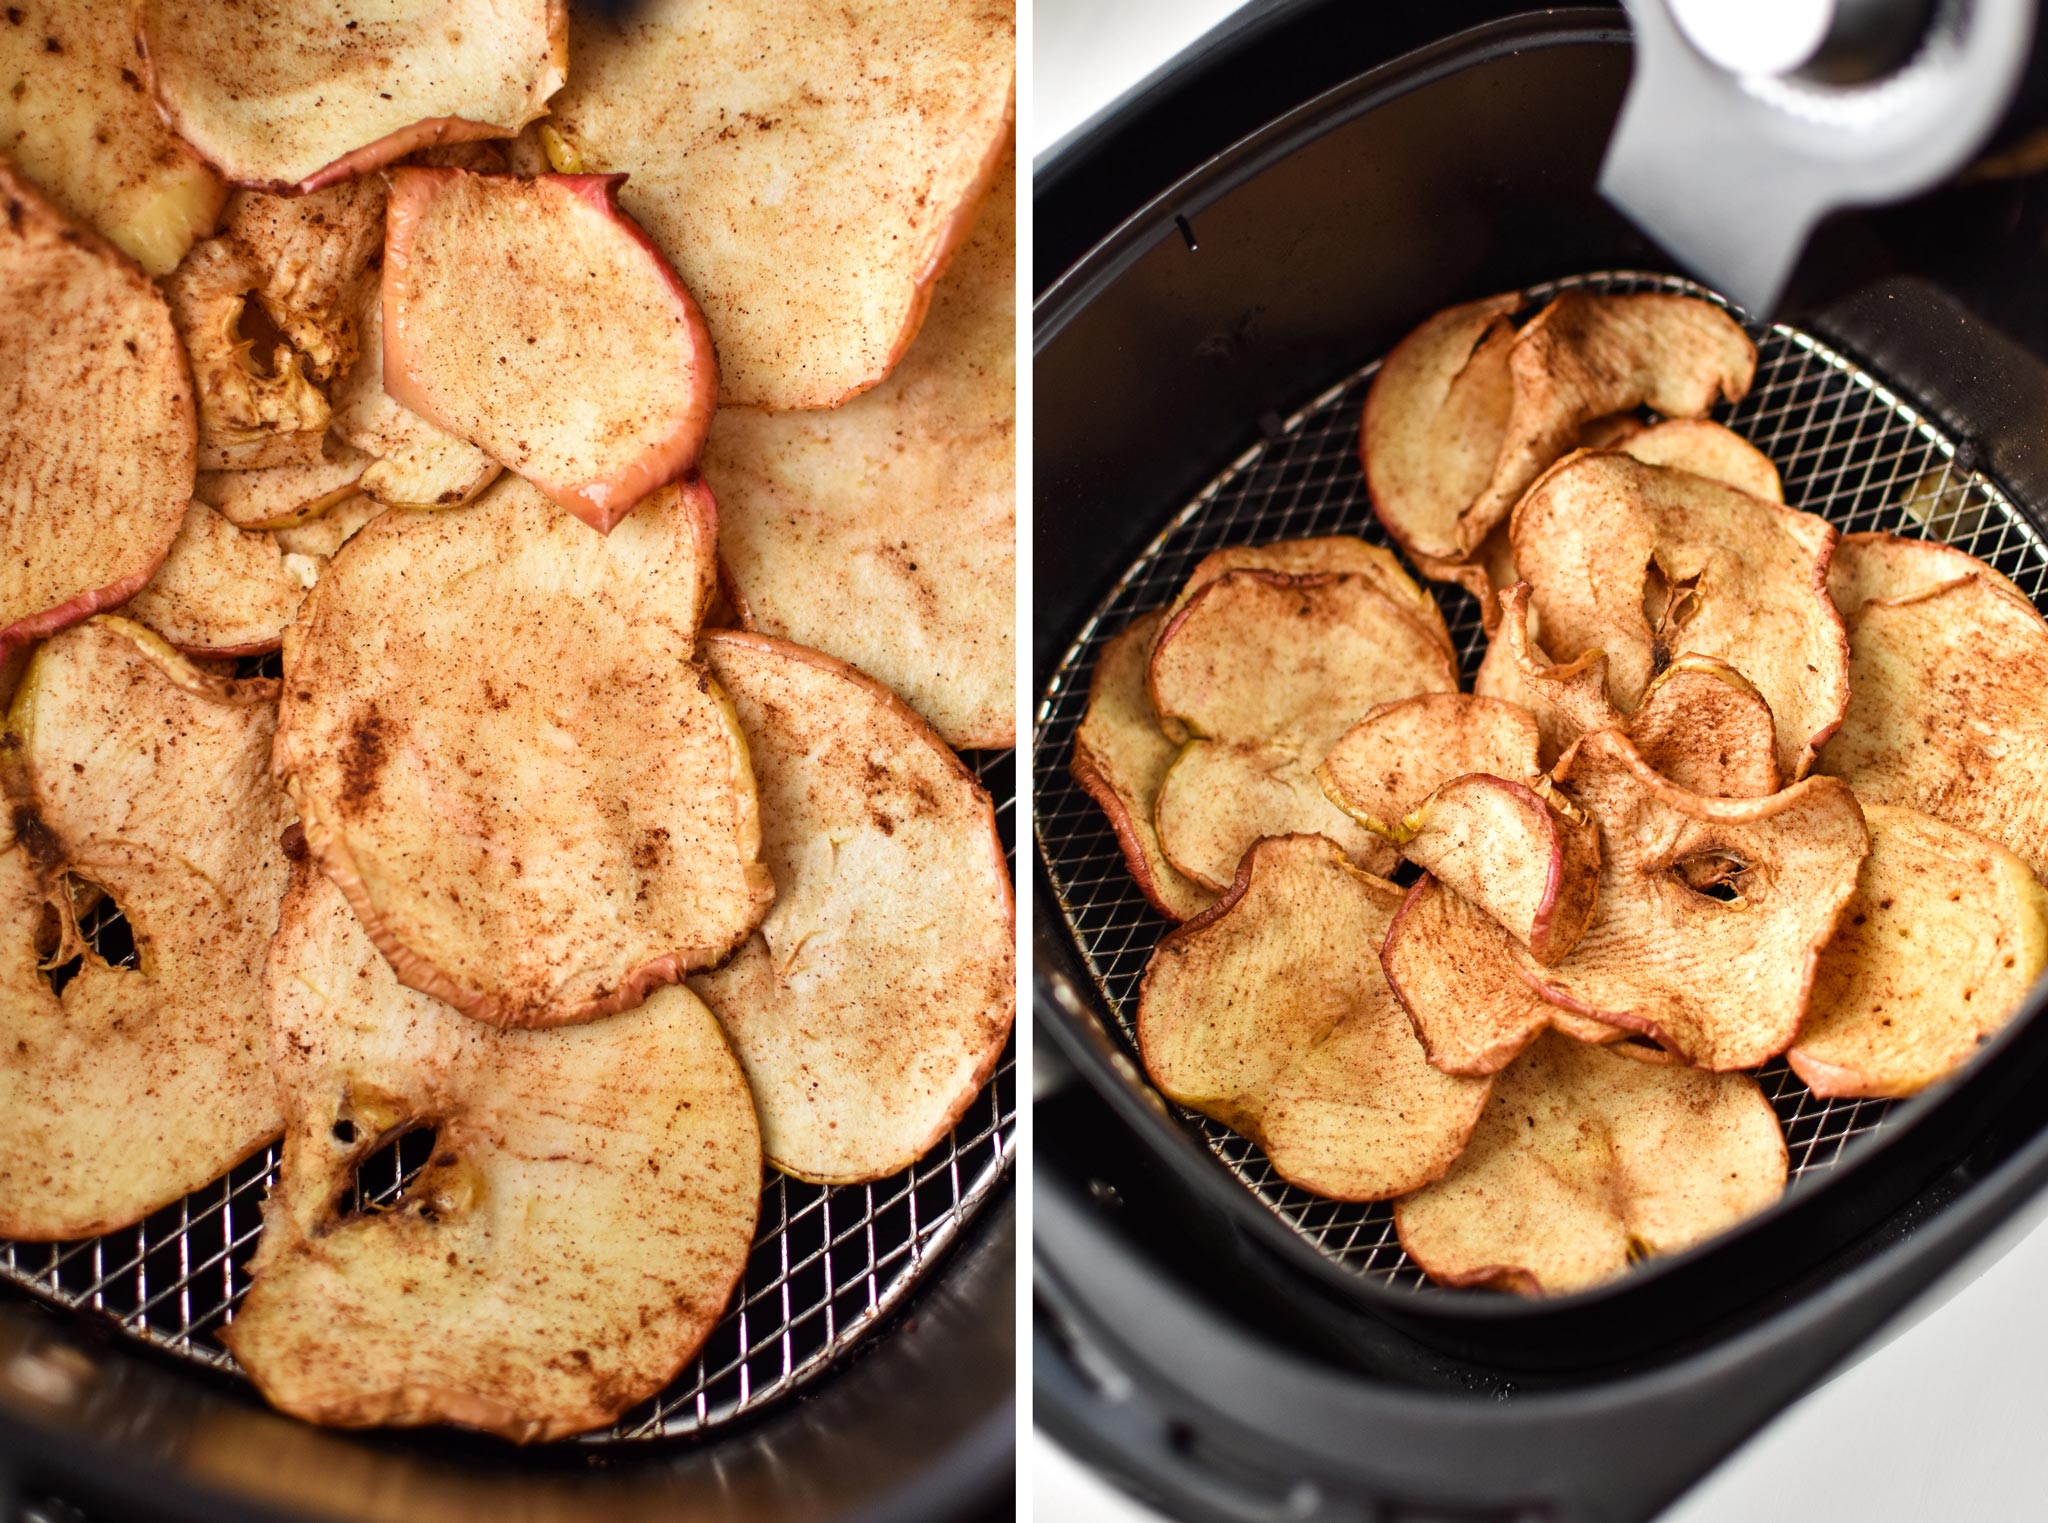 Left: Apple chips after 10 minutes in the air fryer. Right: Apple chips after 22 minutes in the air fryer